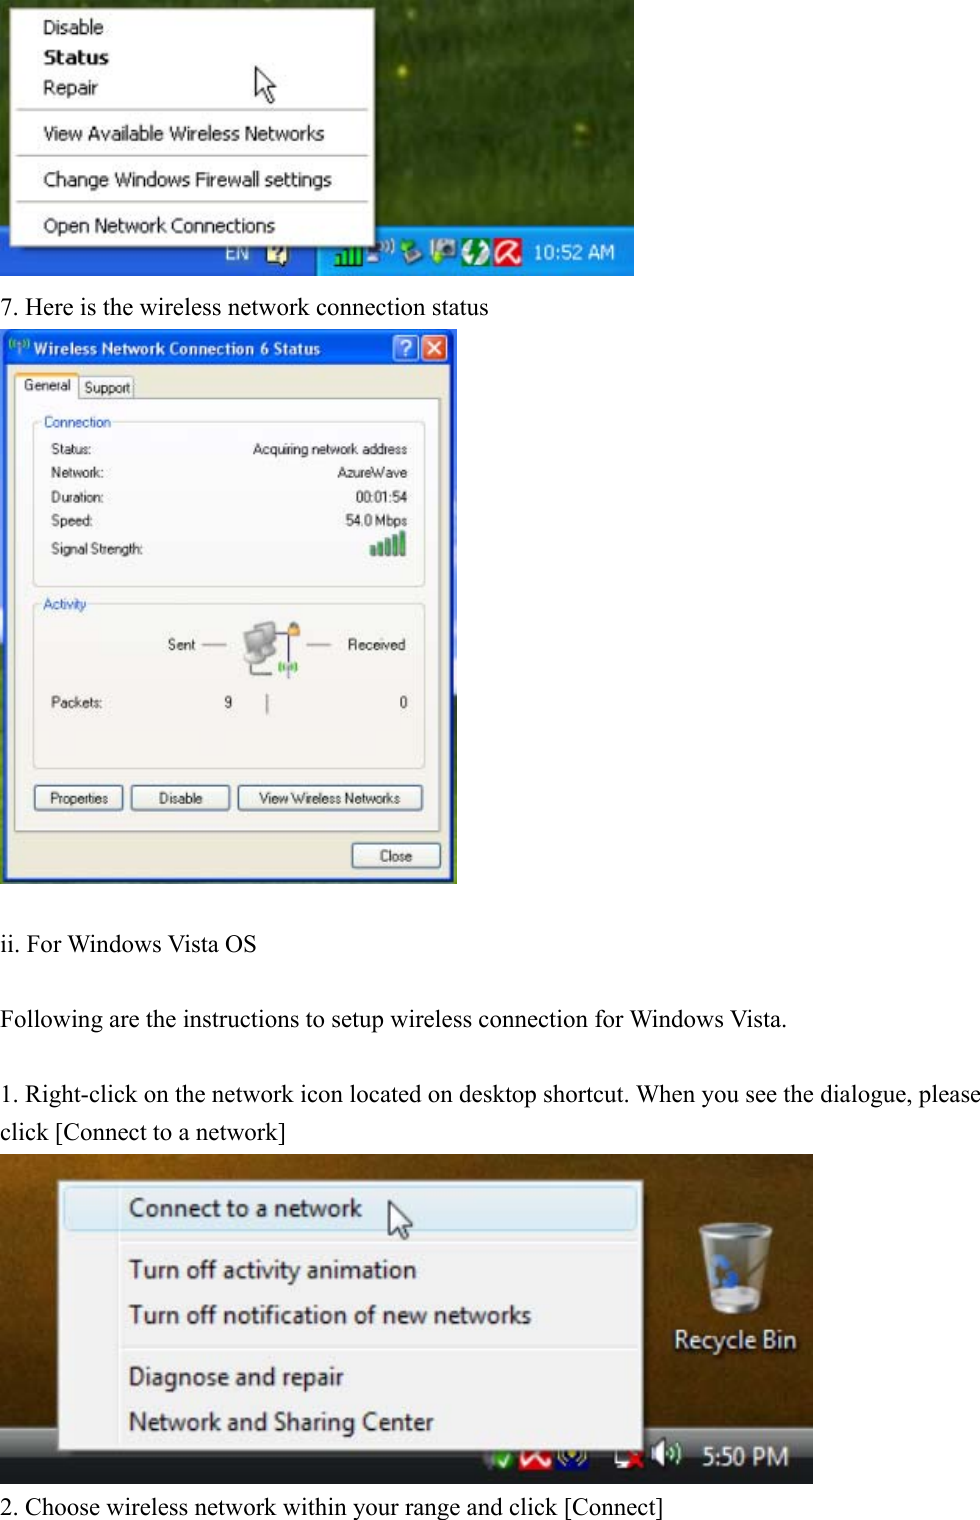  7. Here is the wireless network connection status   ii. For Windows Vista OS  Following are the instructions to setup wireless connection for Windows Vista.  1. Right-click on the network icon located on desktop shortcut. When you see the dialogue, please click [Connect to a network]  2. Choose wireless network within your range and click [Connect] 